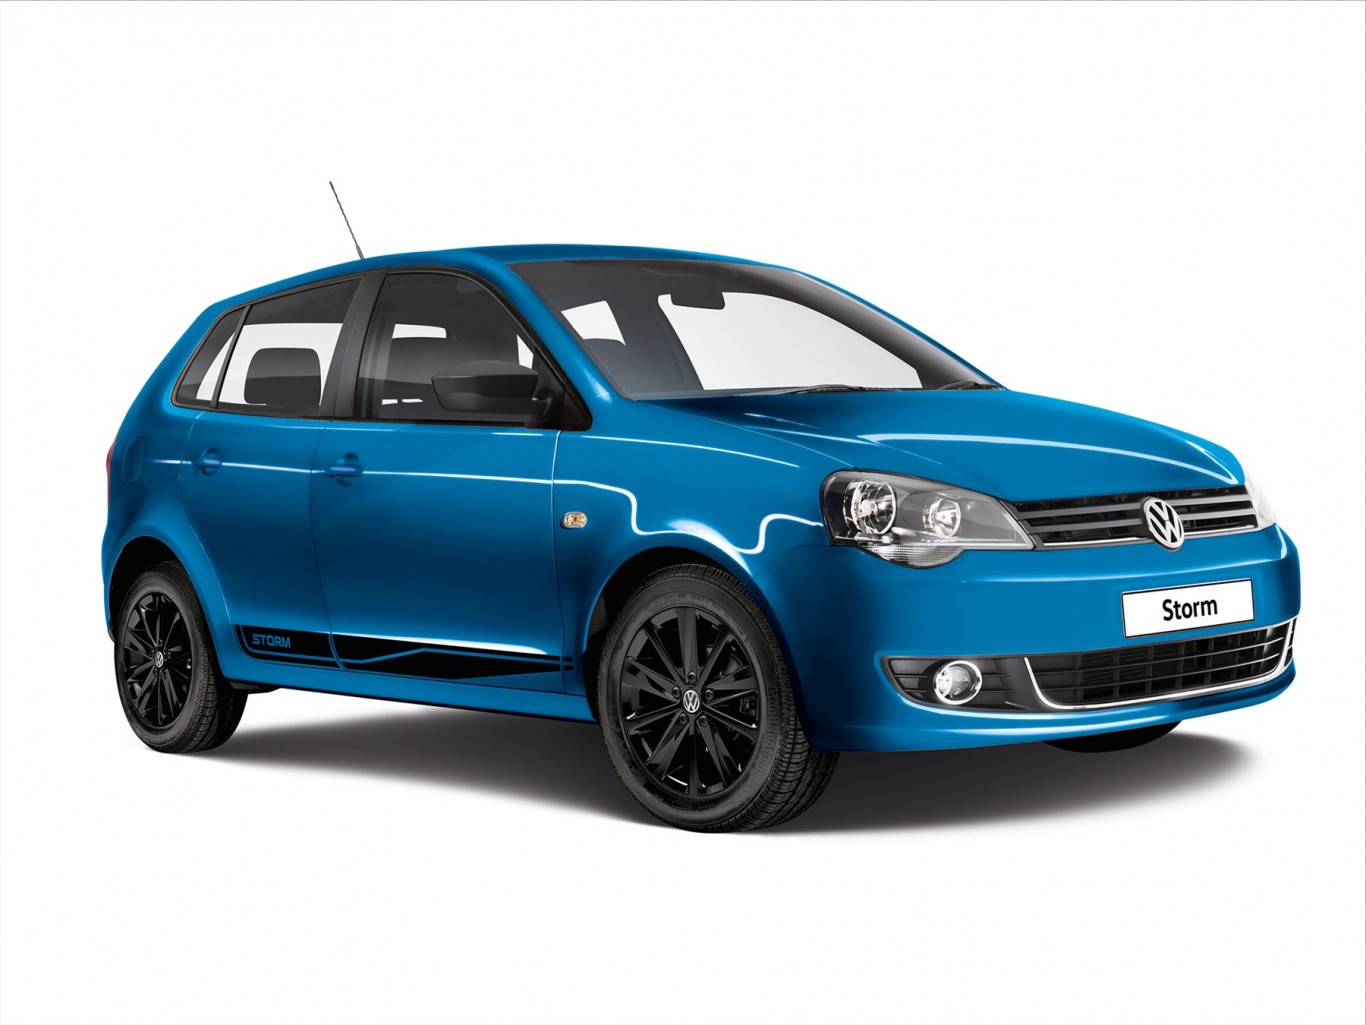 Polo Vivo rejuvenated with the addition of a visually striking special edition, Storm.